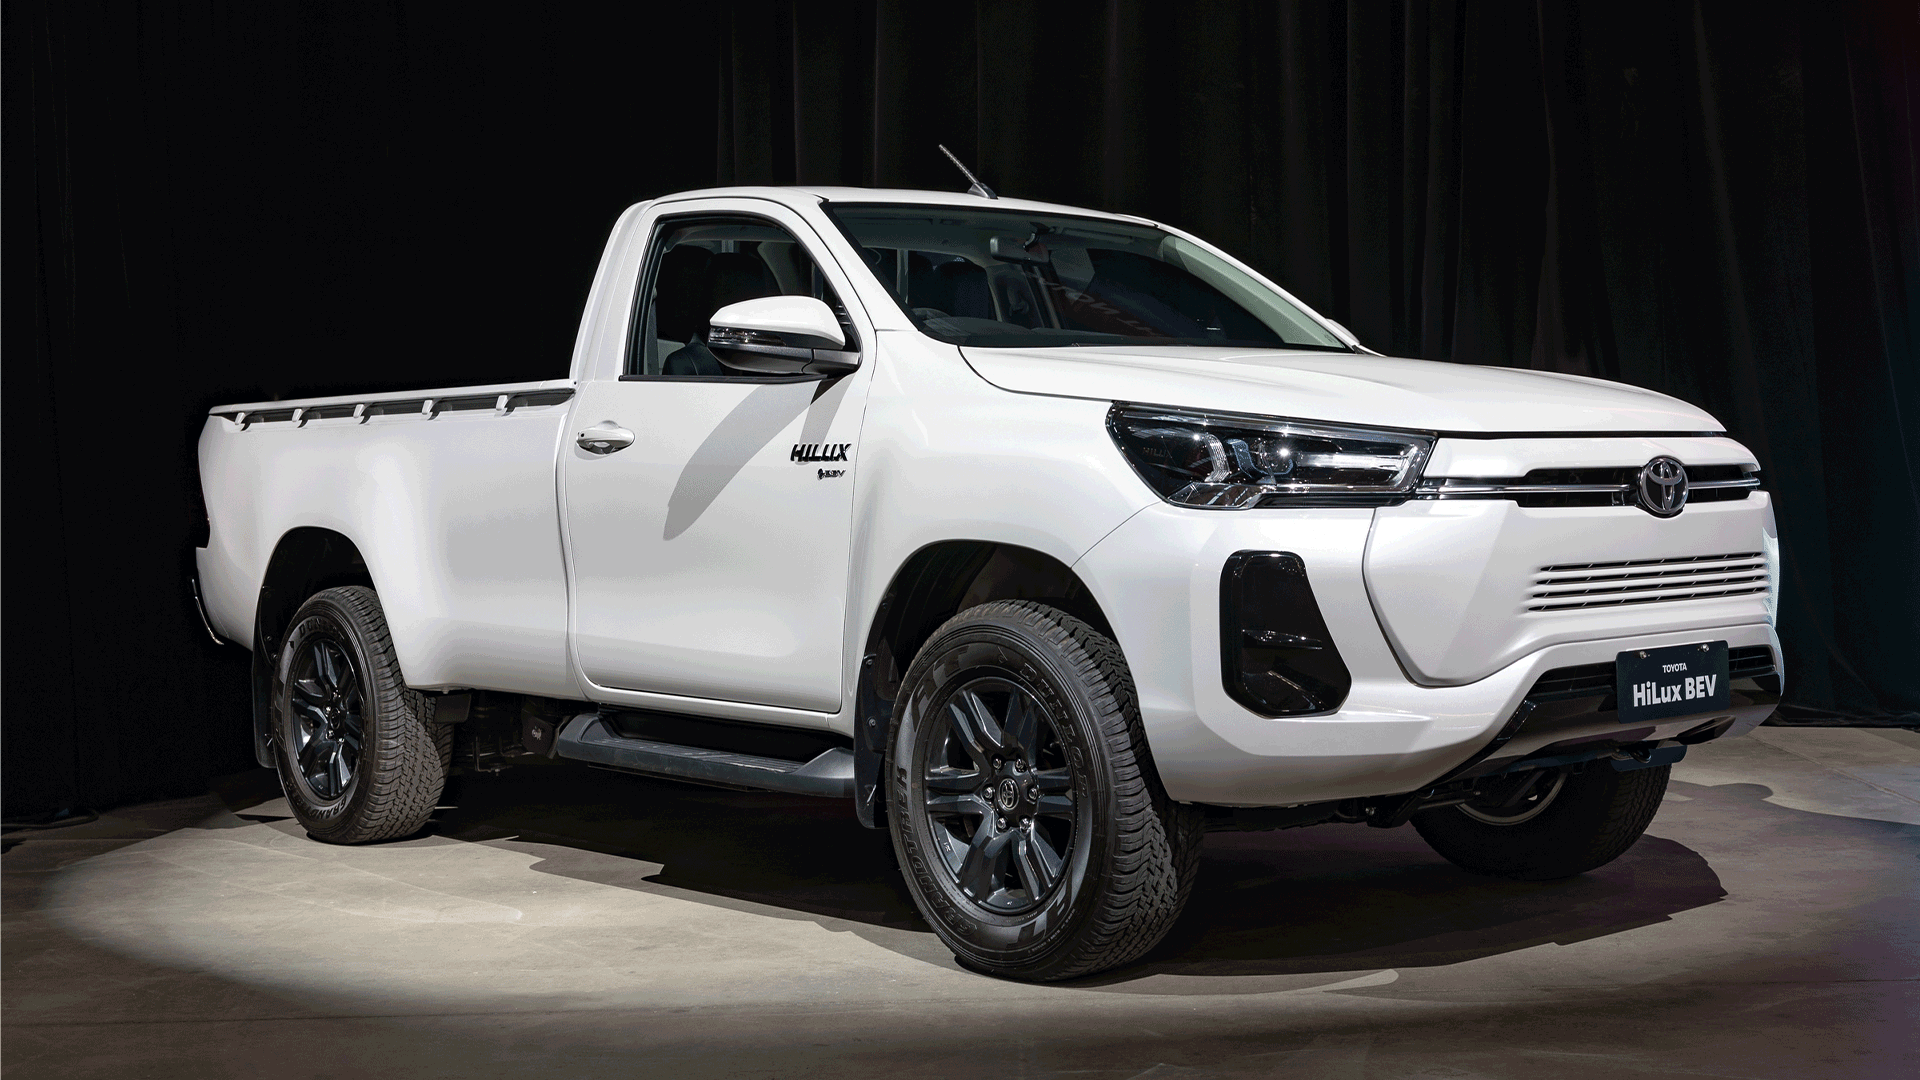 Battery-powered Toyota Hilux pickup truck is undergoing trials